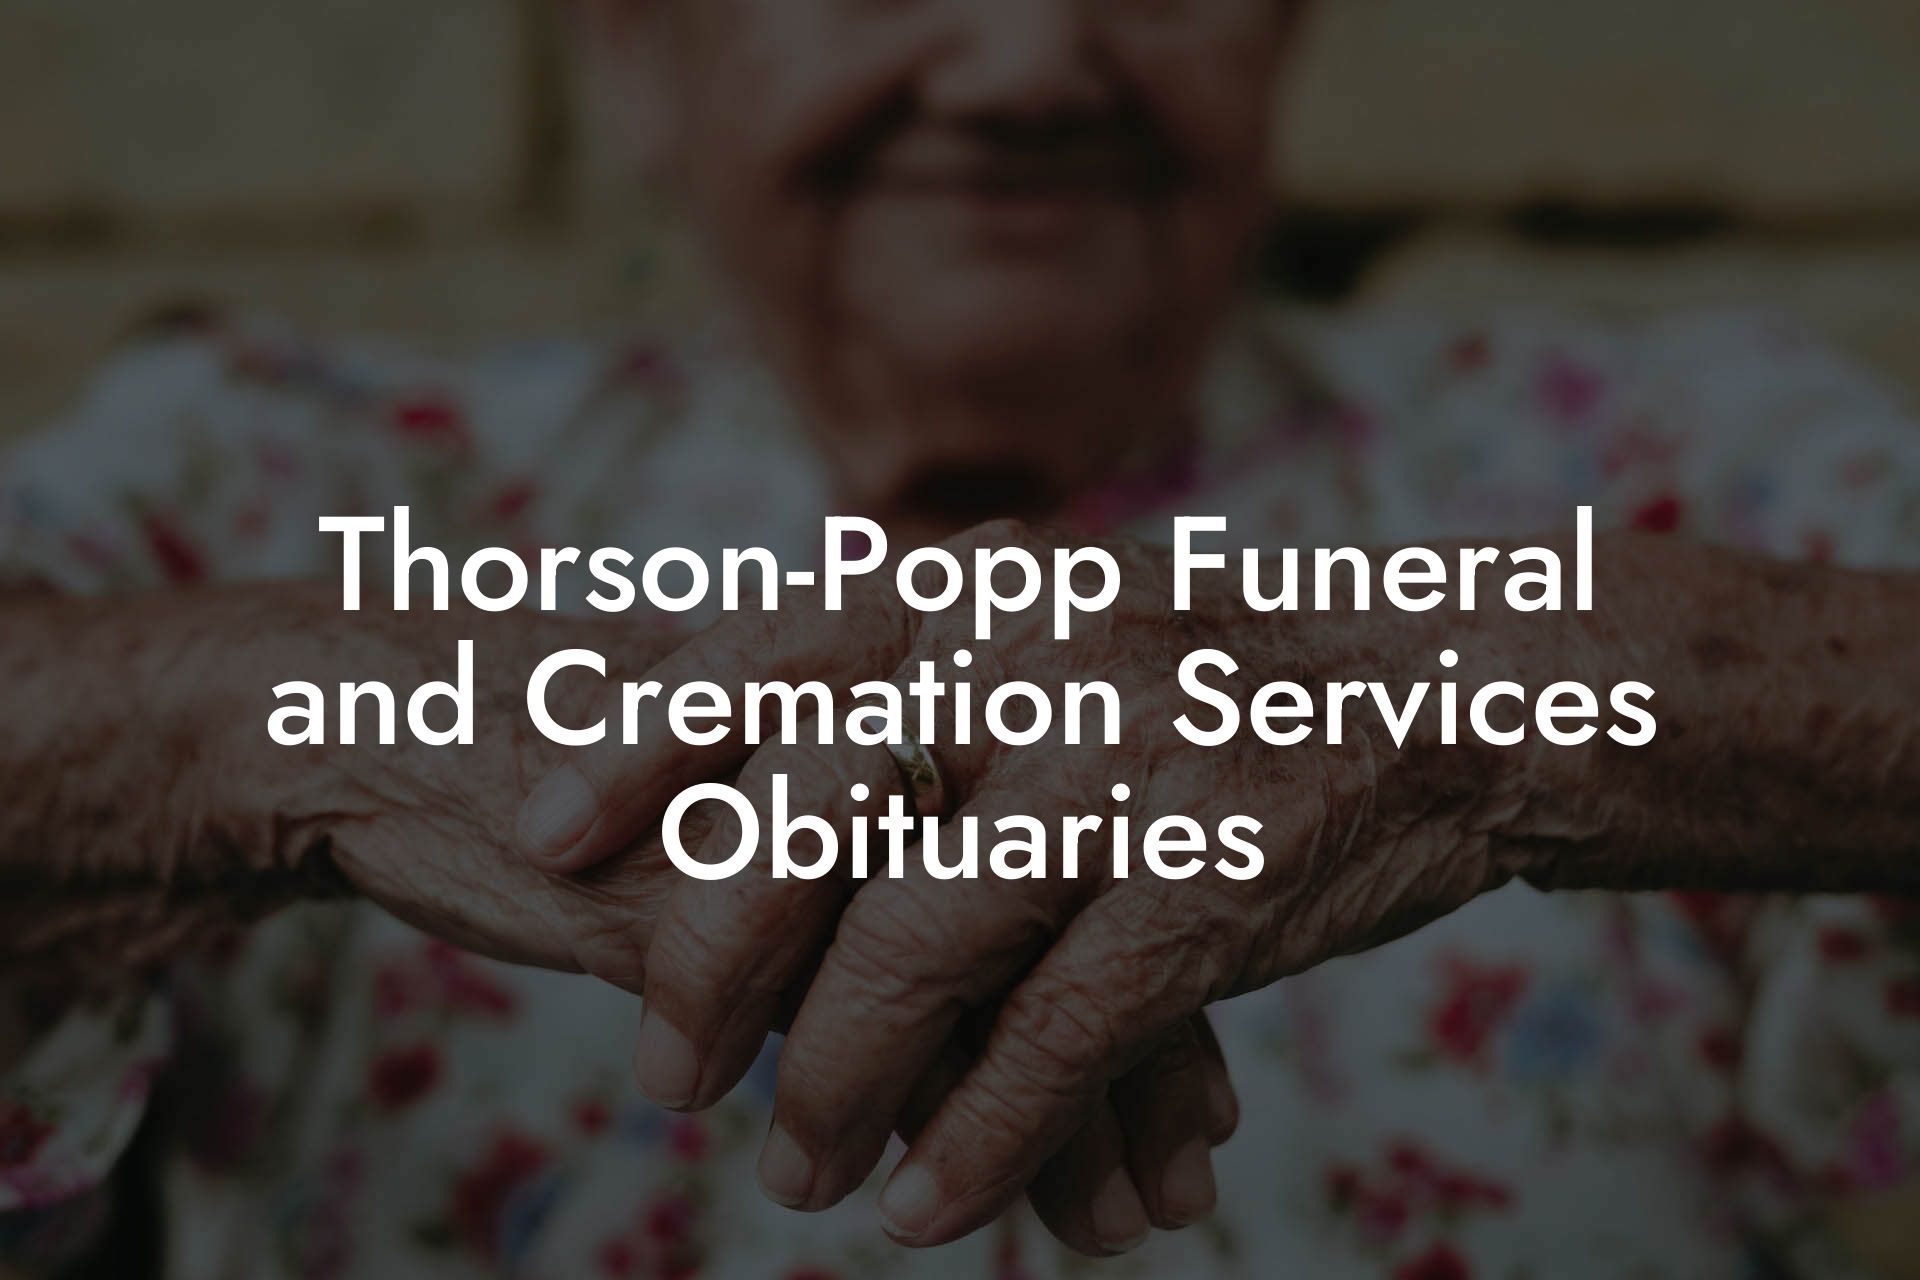 Thorson-Popp Funeral and Cremation Services Obituaries